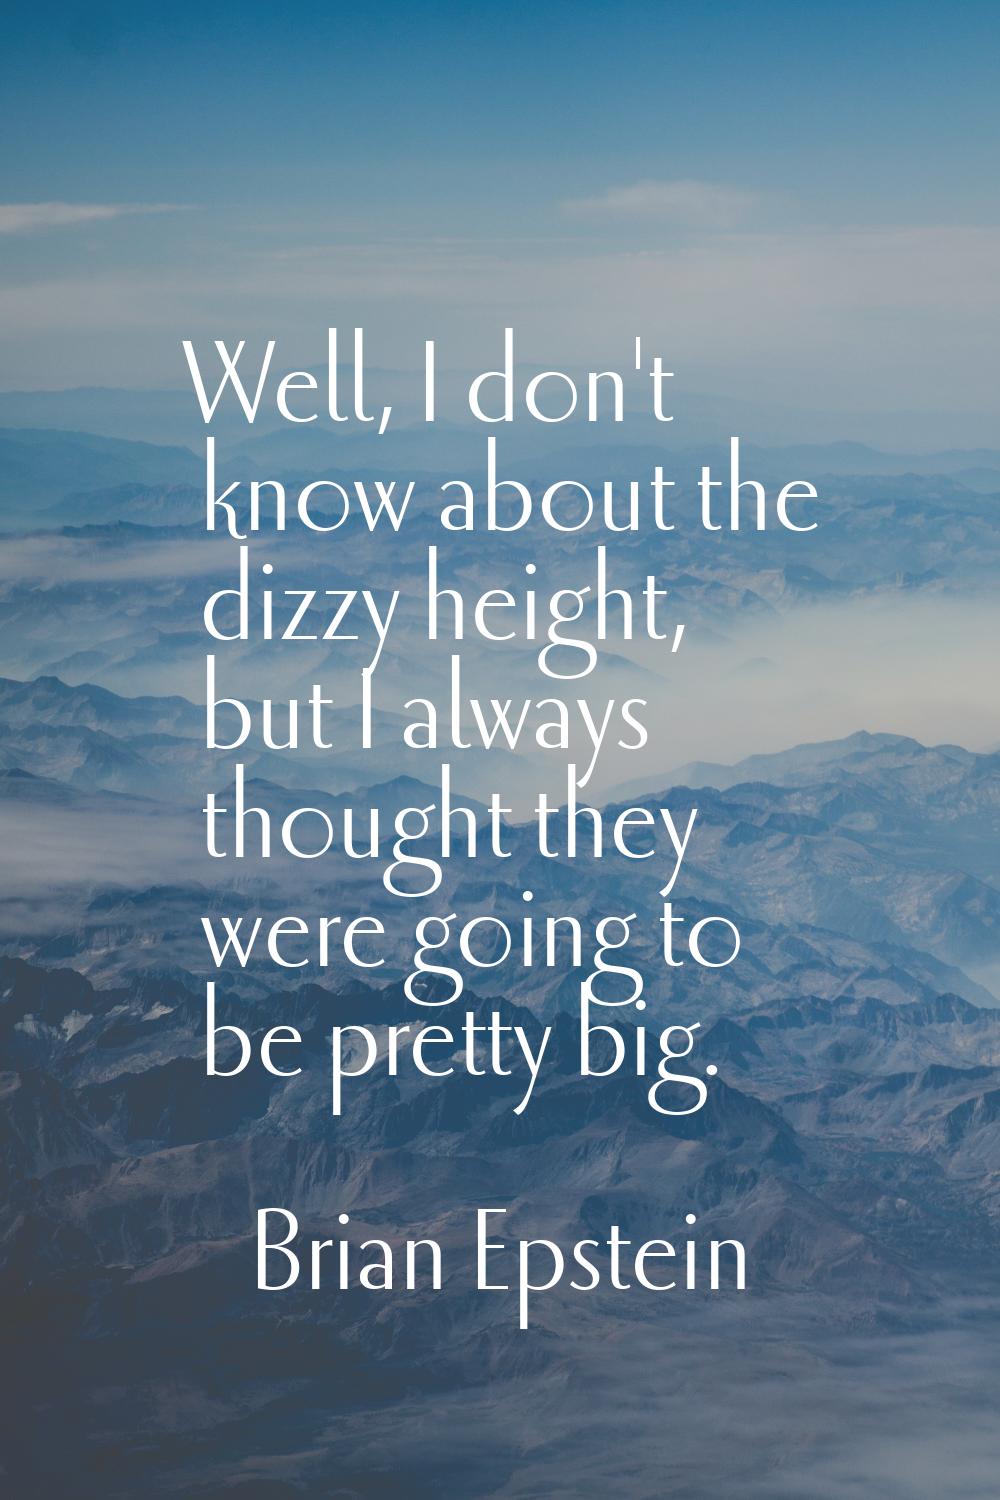 Well, I don't know about the dizzy height, but I always thought they were going to be pretty big.